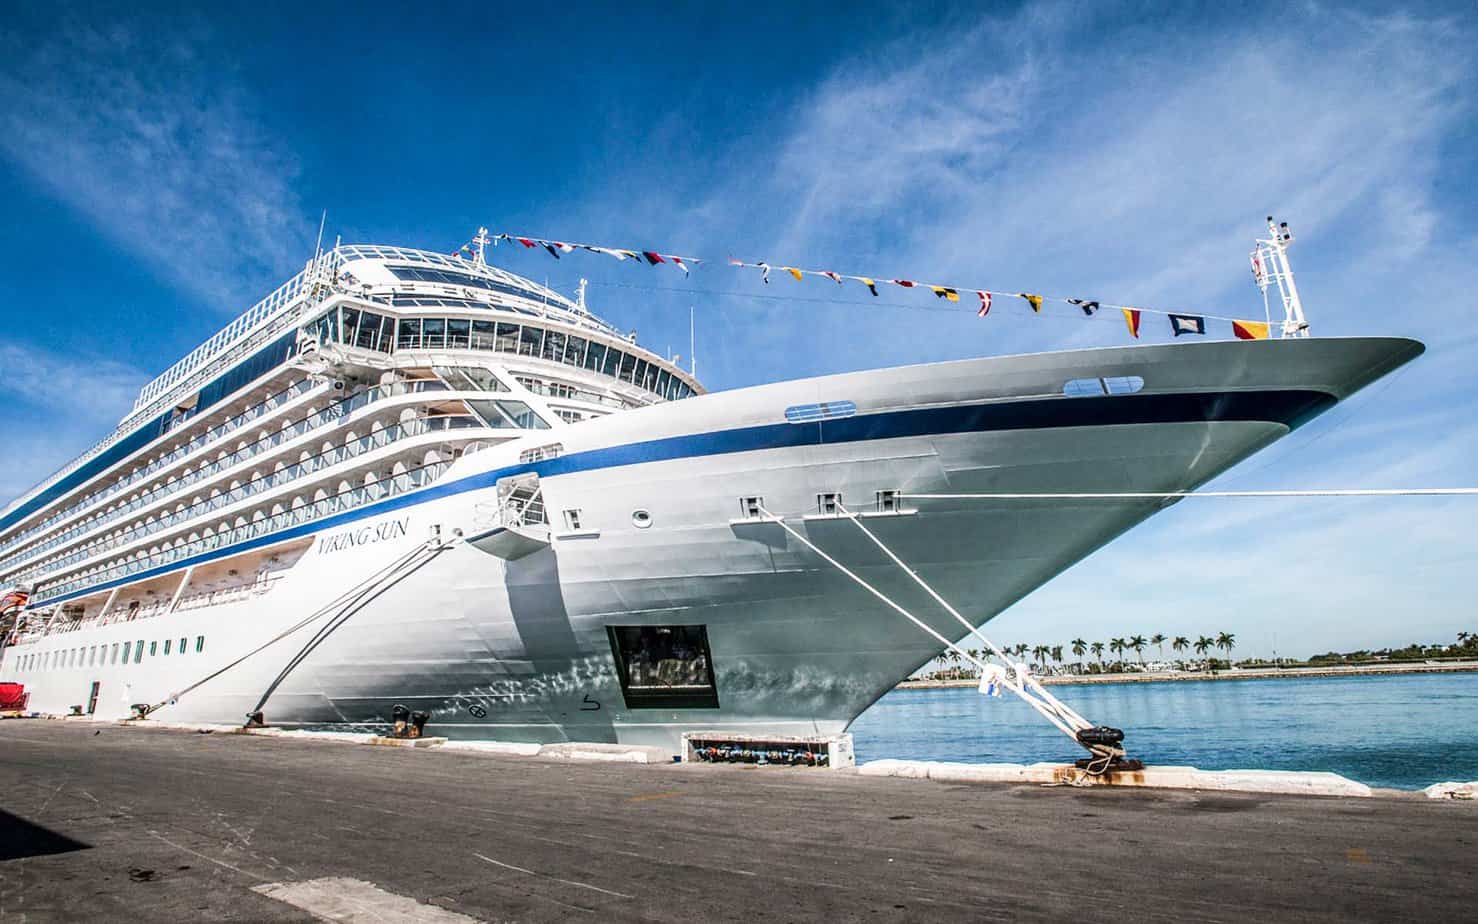 VIKING CRUISES SUSPENDS TRAVEL - If you were planning on using their lines, you'll have to wait